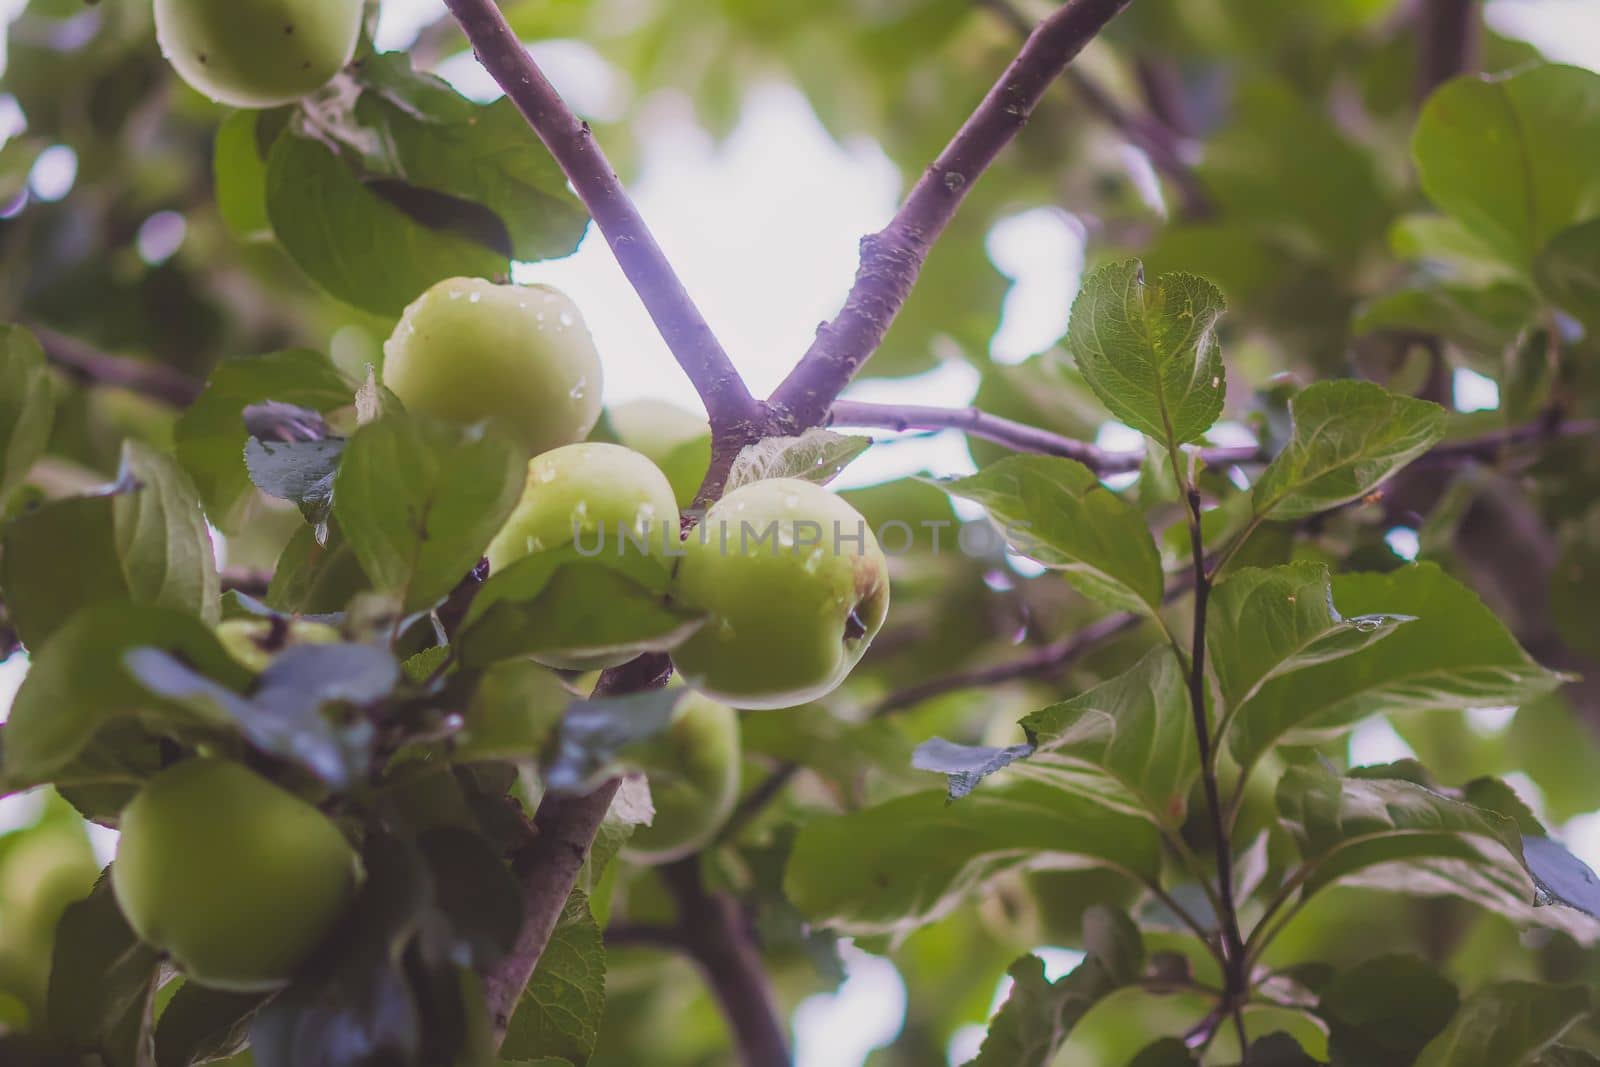 Green apples on a branch. Fruits ready to be harvested